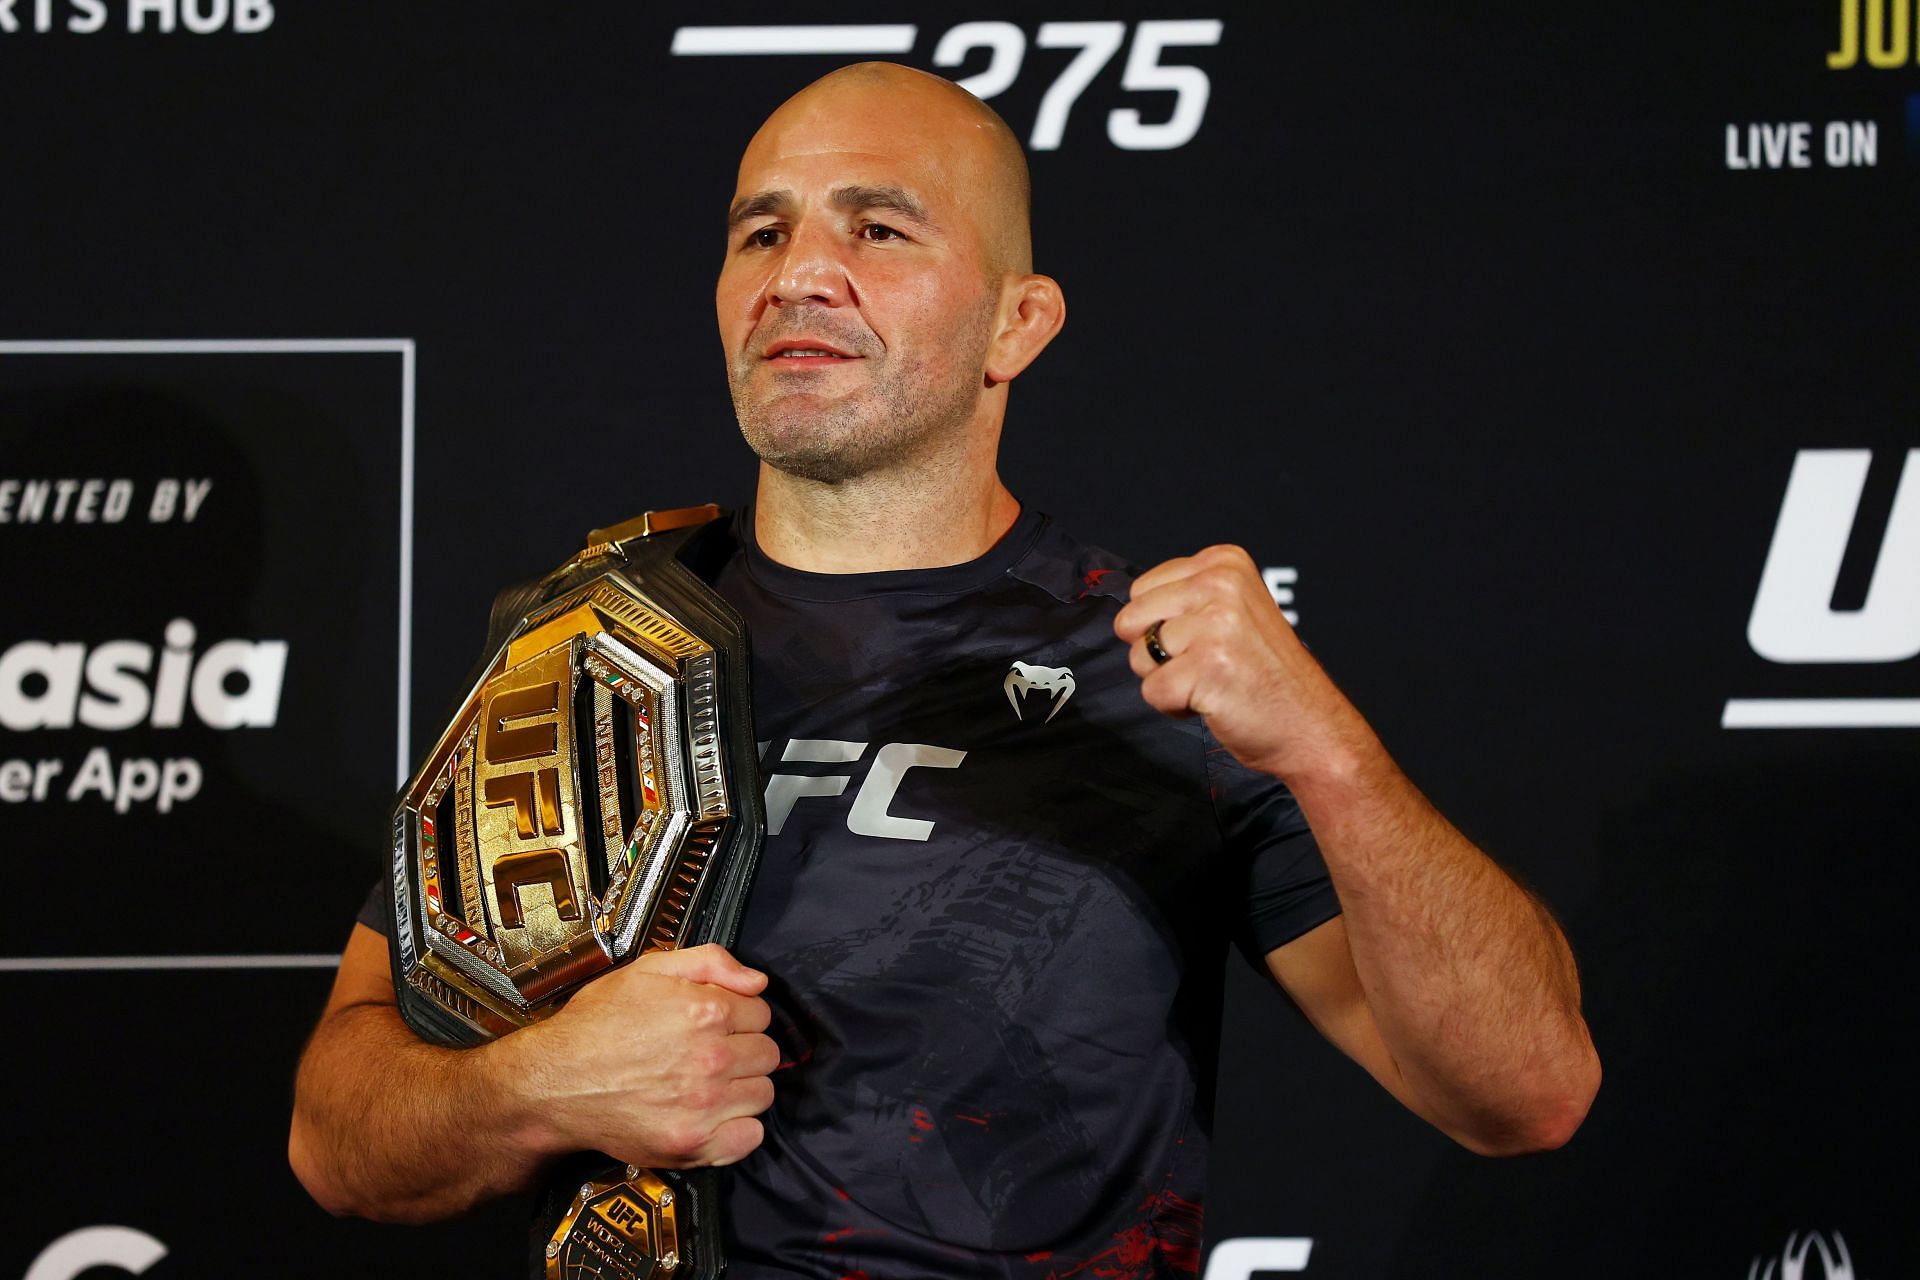 Few fans expected Glover Teixeira to claim UFC gold in the first place